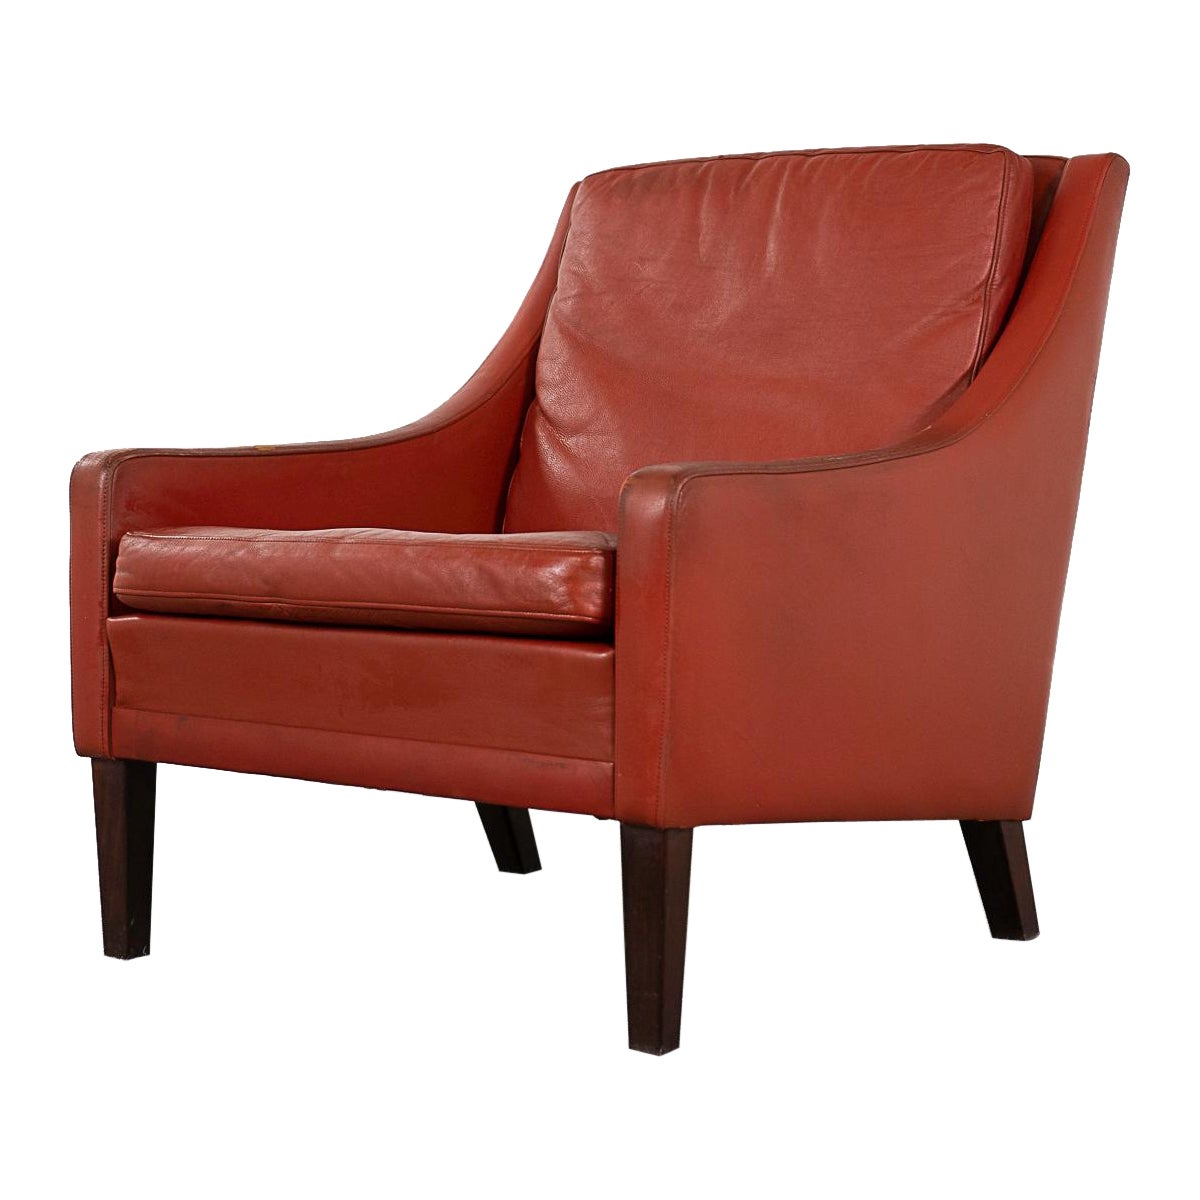 Danish Modern Rust Leather Lounge Chair For Sale